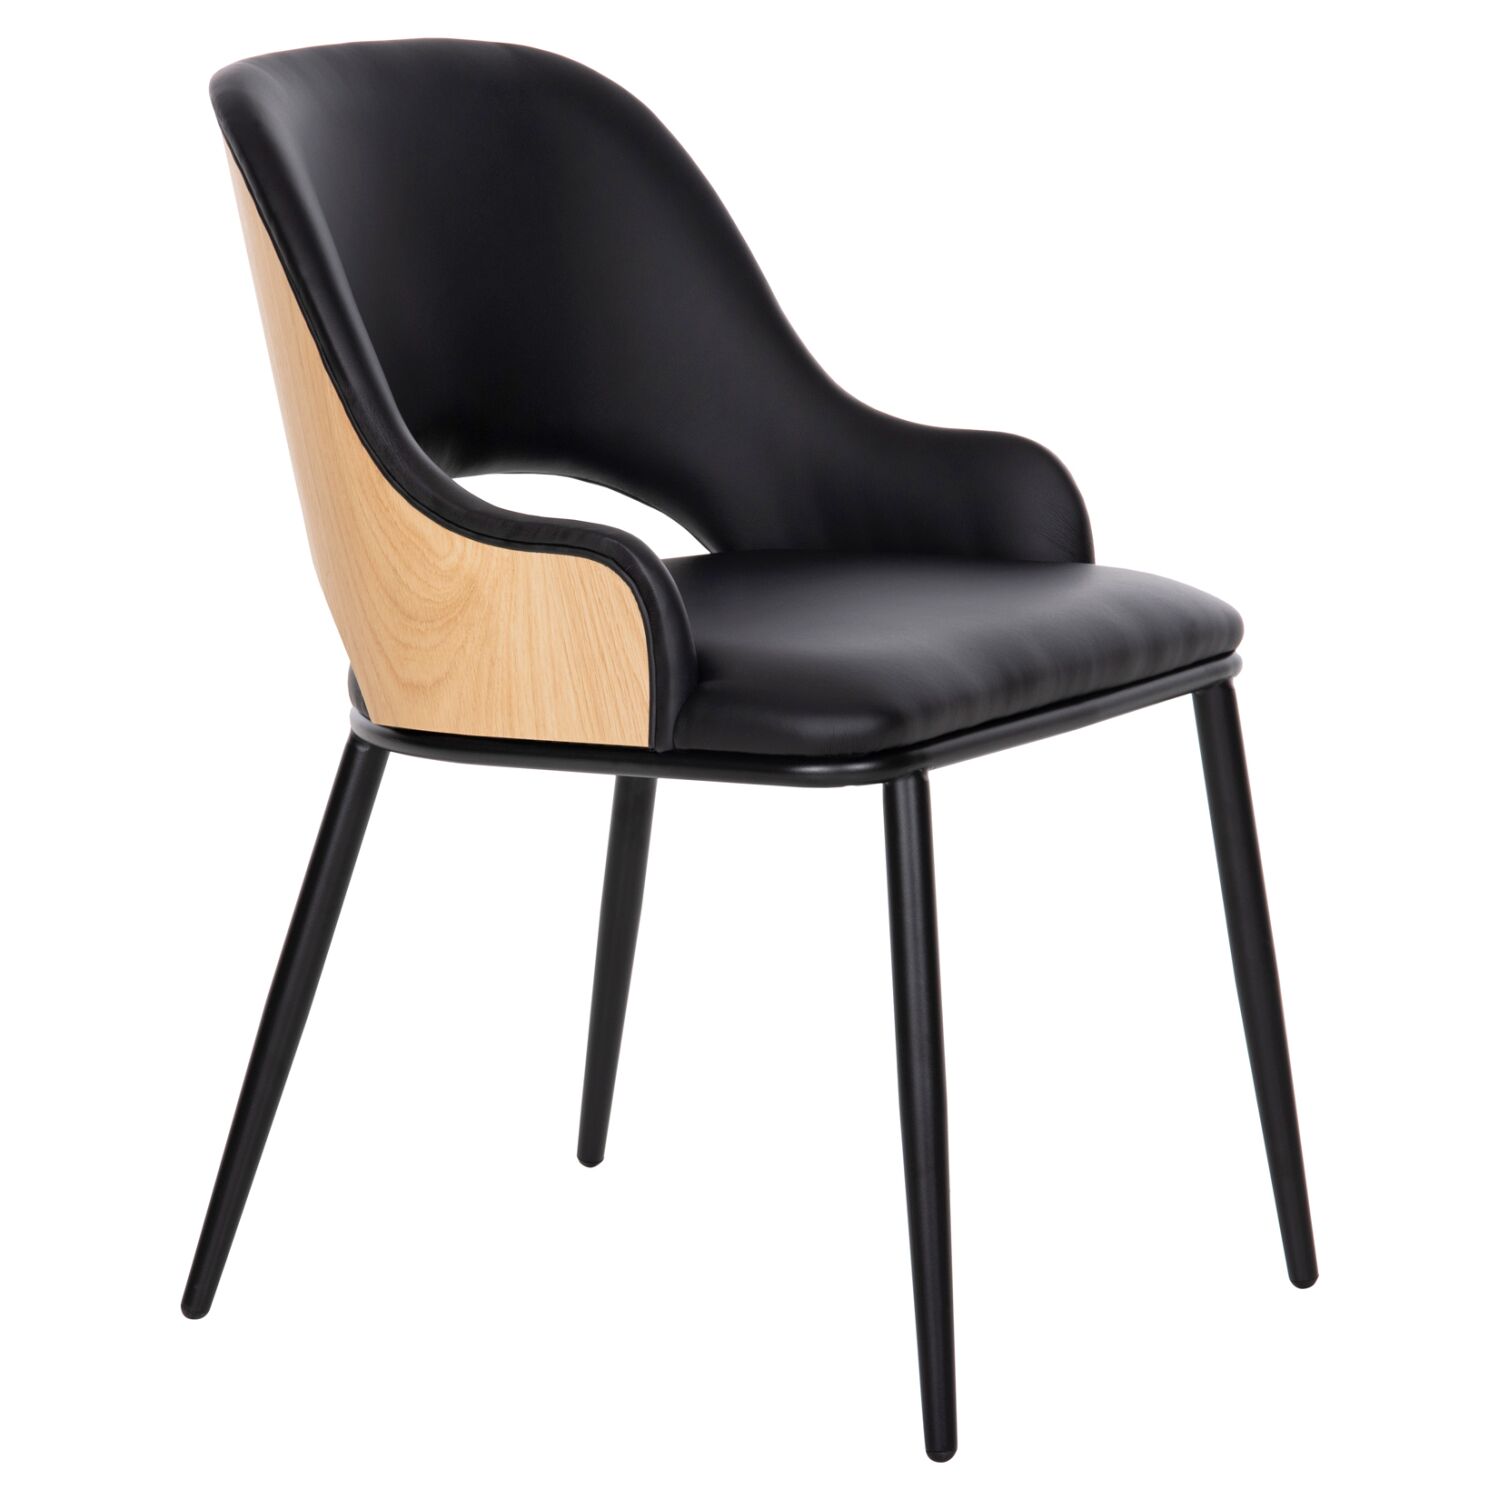 DINING CHAIR DELF HM9617.01 PU BLACK-BLACK METAL LEGS-WOODEN BACK IN NATURAL 48x55x76Hcm.